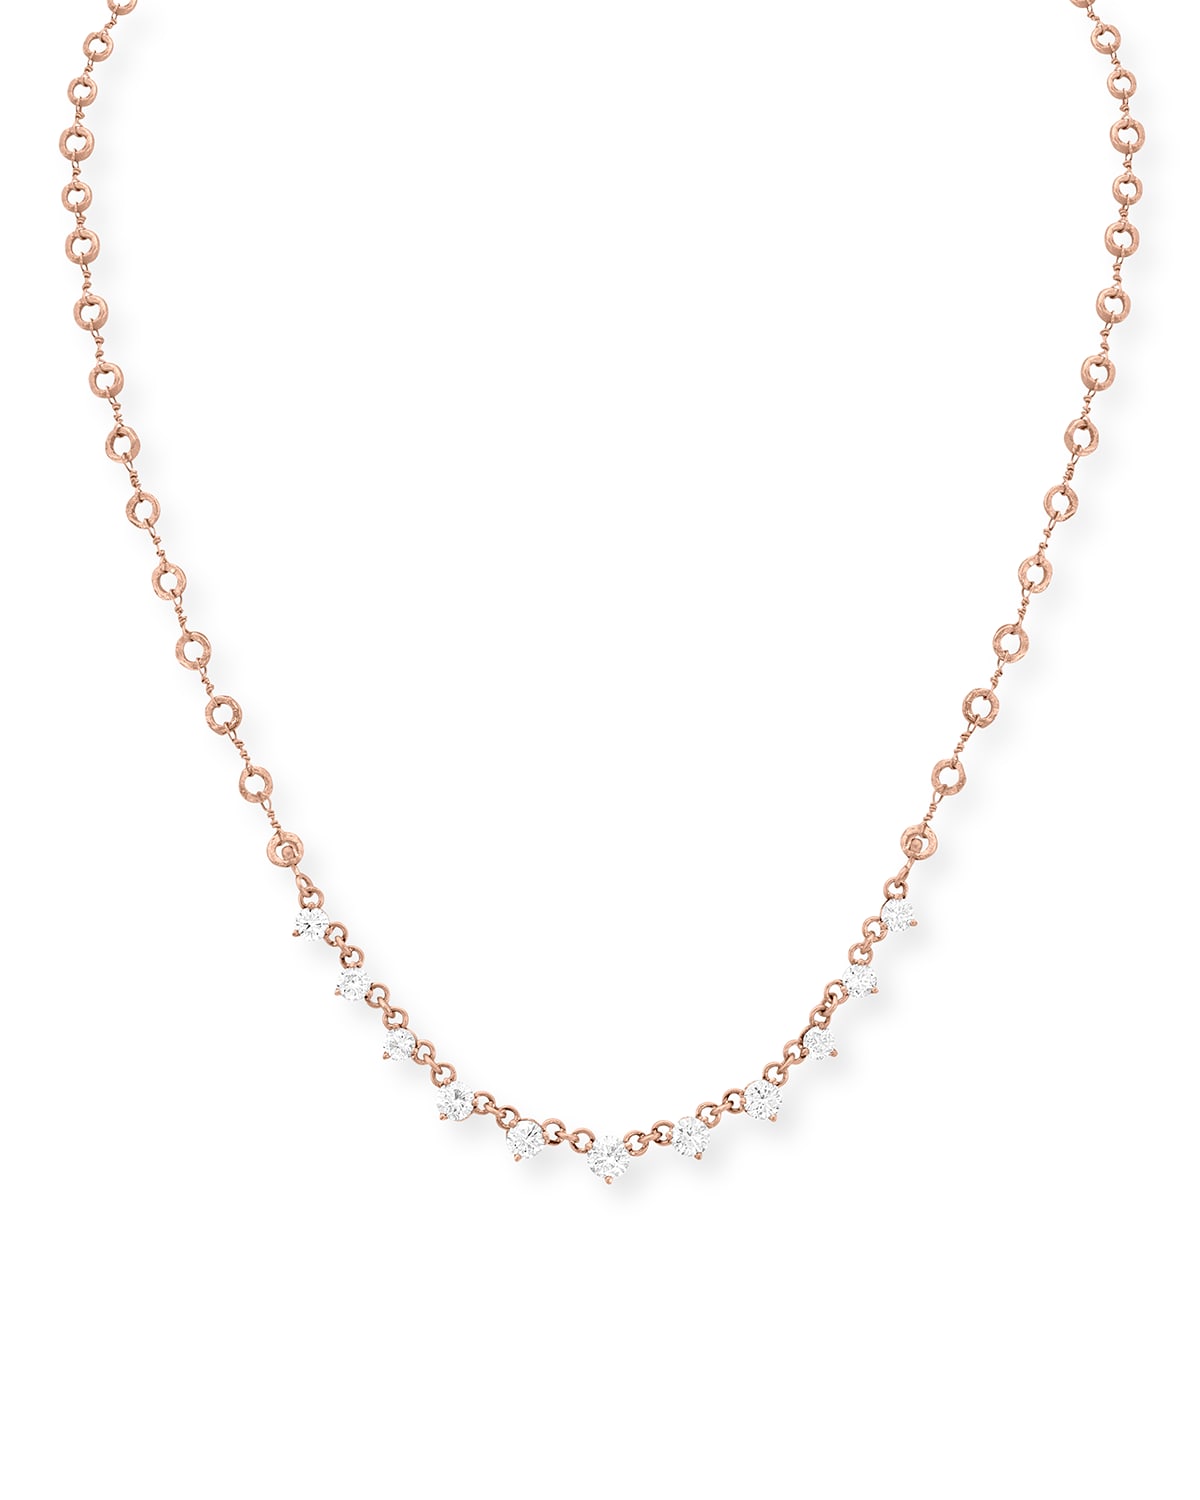 Dominique Cohen 18k Rose Gold Carved Link Necklace with Diamonds